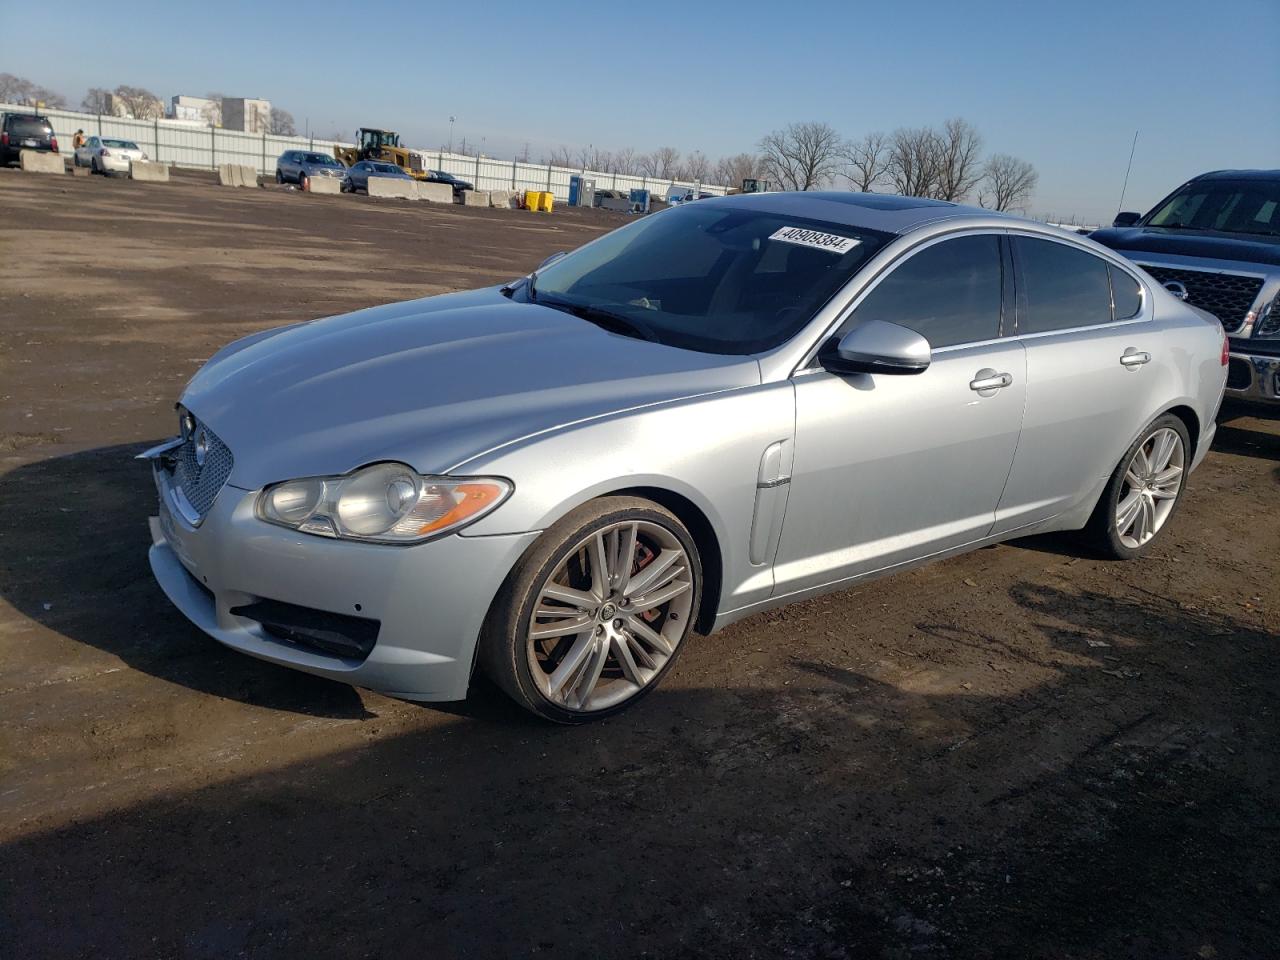 vin: SAJWA0HE5AMR77668 SAJWA0HE5AMR77668 2010 jaguar xf 5000 for Sale in 60411 5546, Il - Chicago South, Chicago Heights, USA